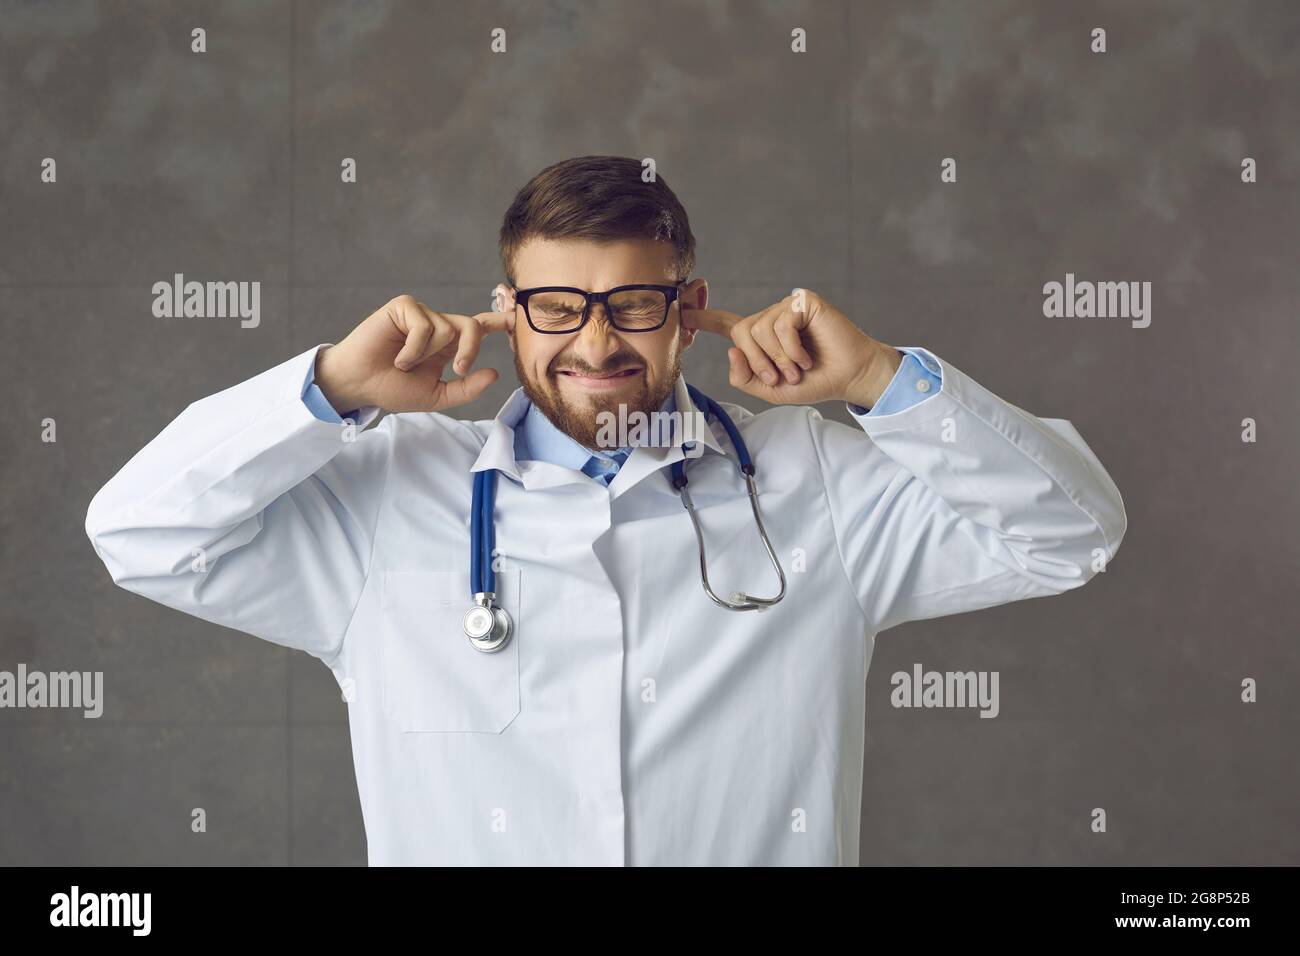 Annoyed stressed doctor closes ears with fingers trying to ignore loud hospital noises Stock Photo